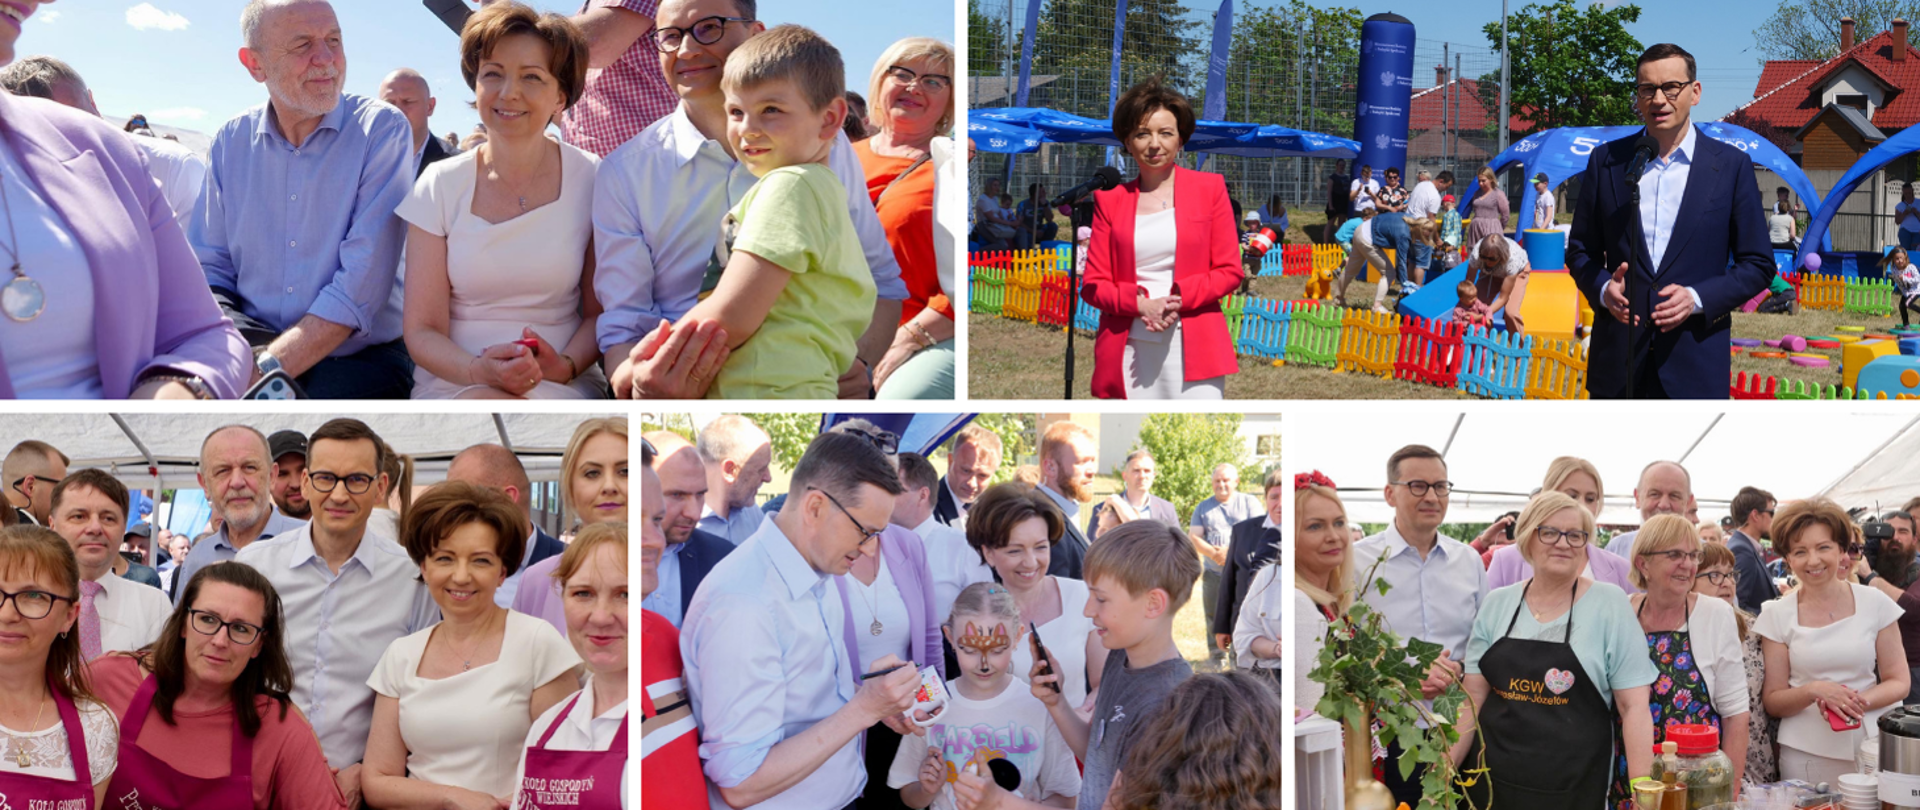 Family picnic in Raszków with the participation of Prime Minister Morawiecki and Minister Maląg